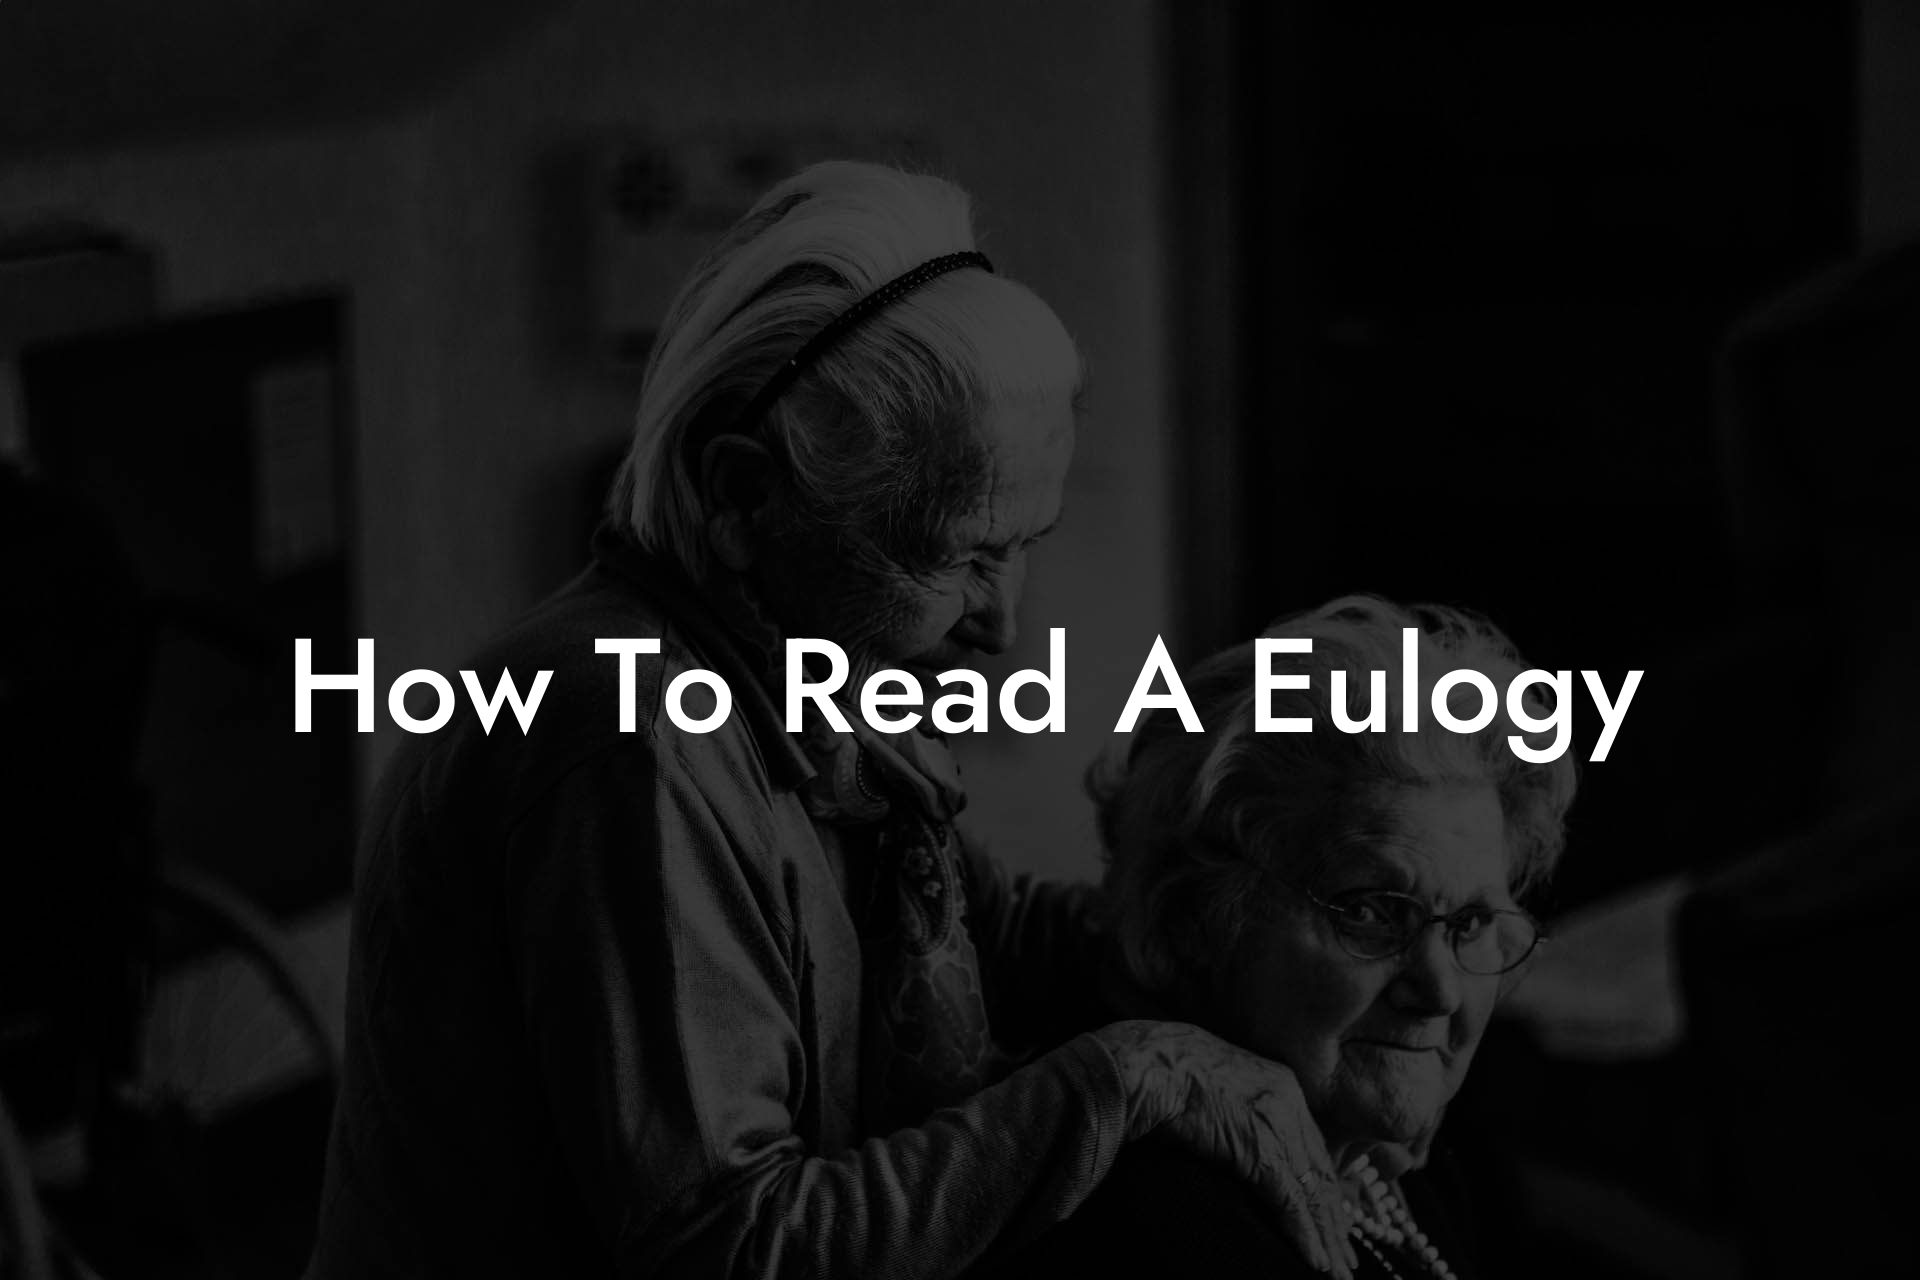 How To Read A Eulogy